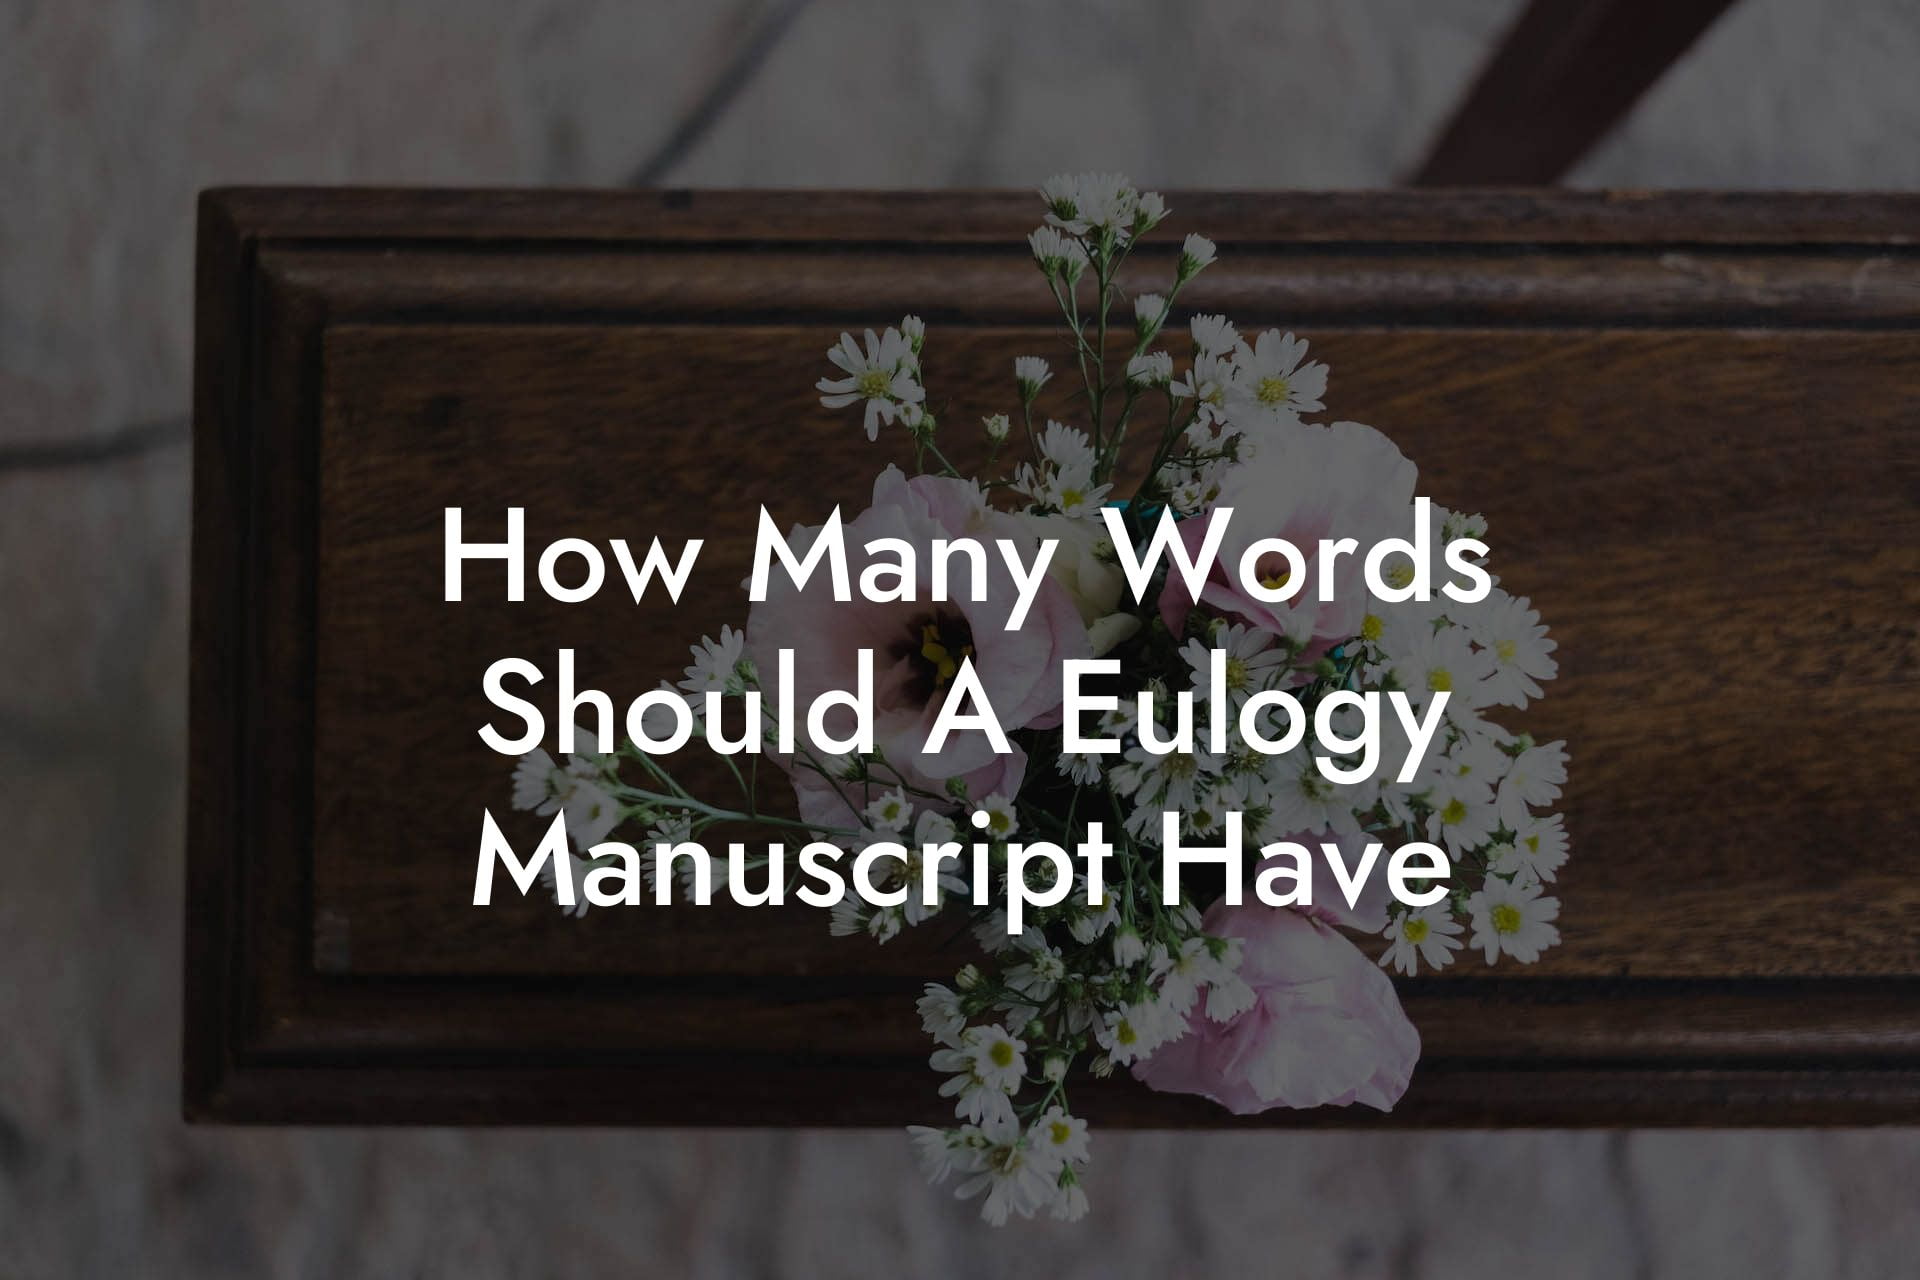 How Many Words Should A Eulogy Manuscript Have